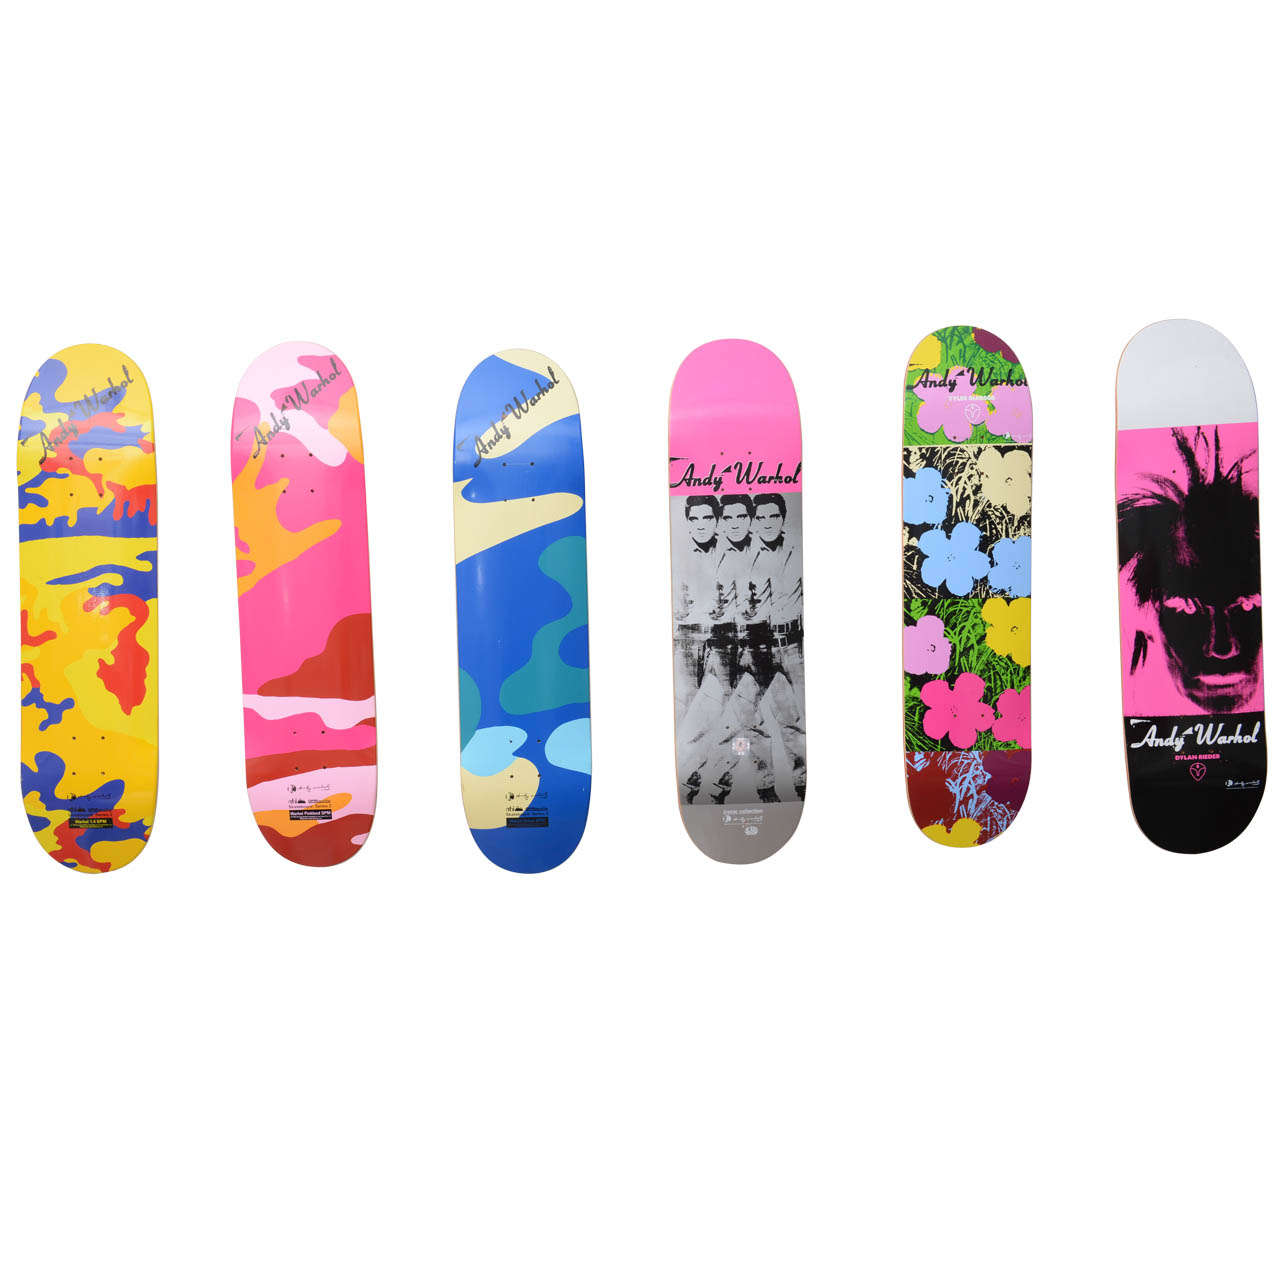 Set of 6 Authorized Andy Warhol Skateboards from 20th Century at 1stDibs